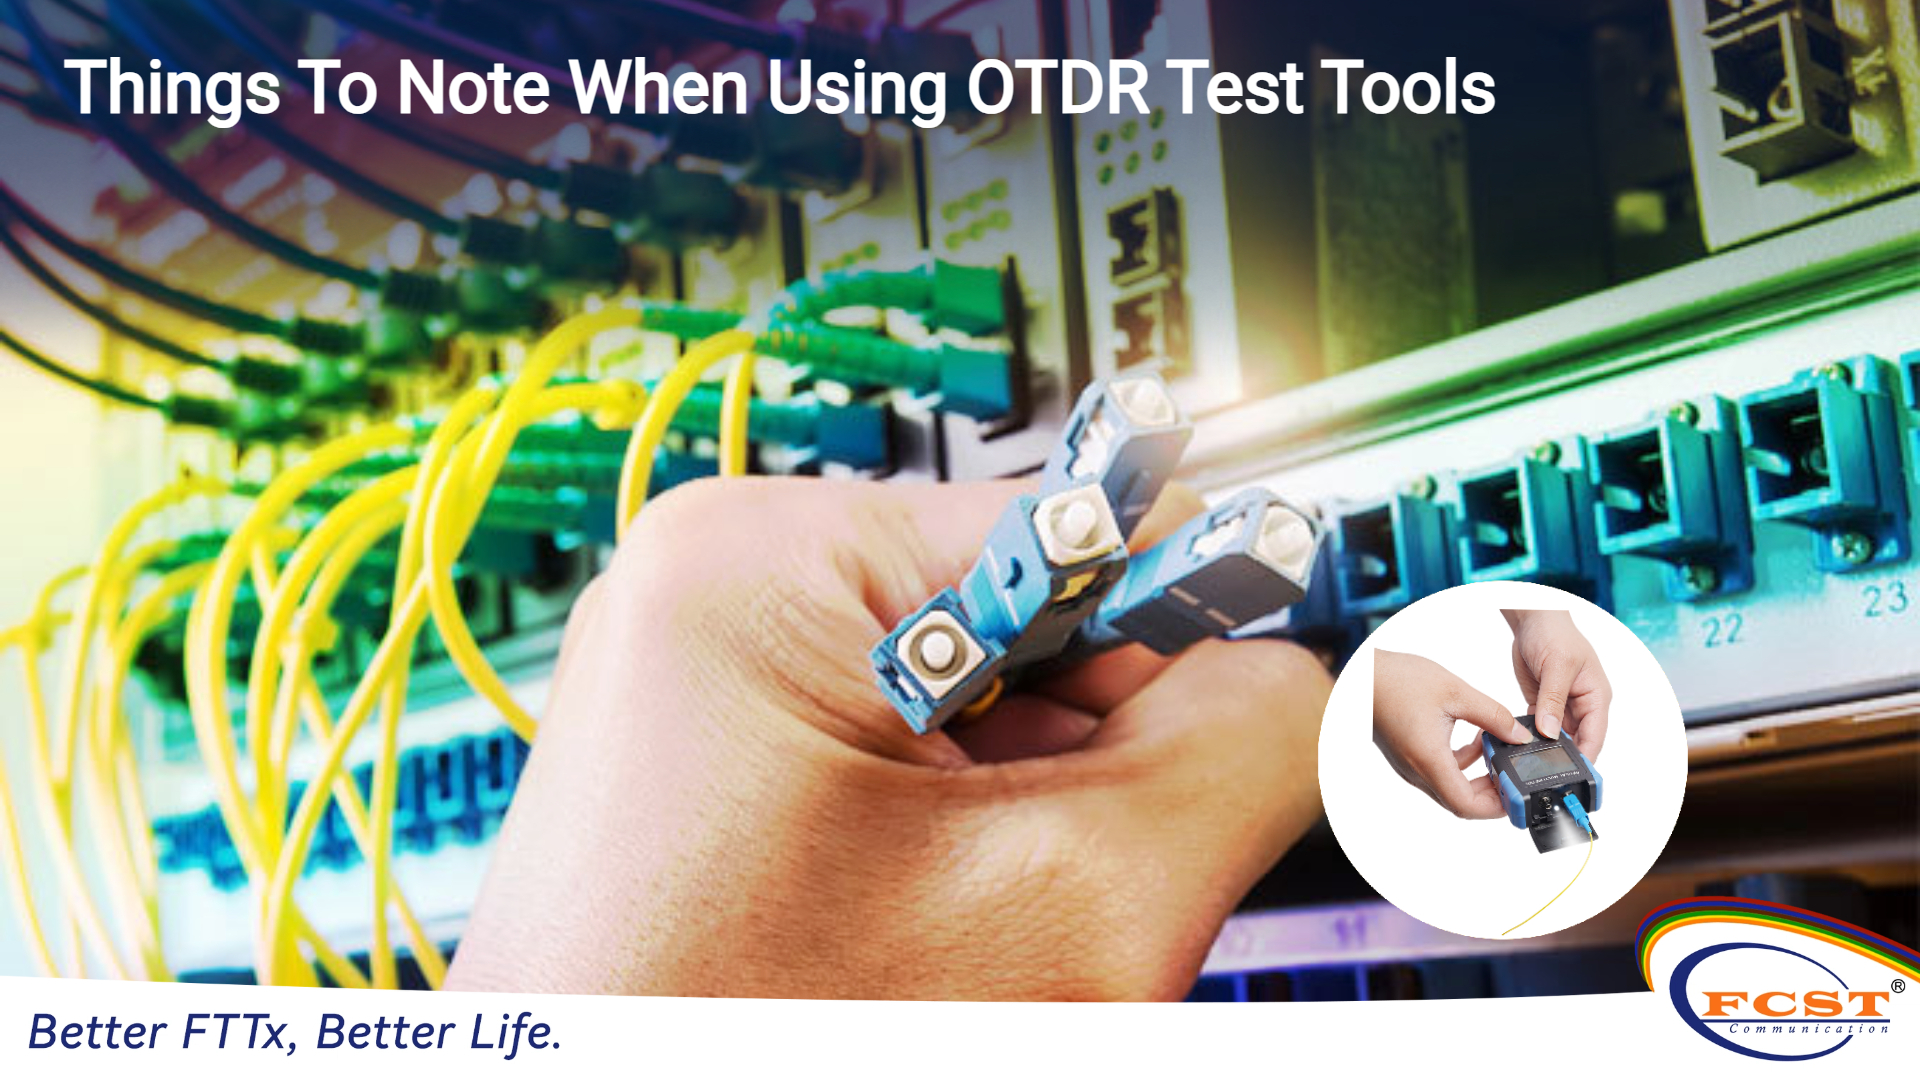 Things To Note When Using OTDR Test Tools